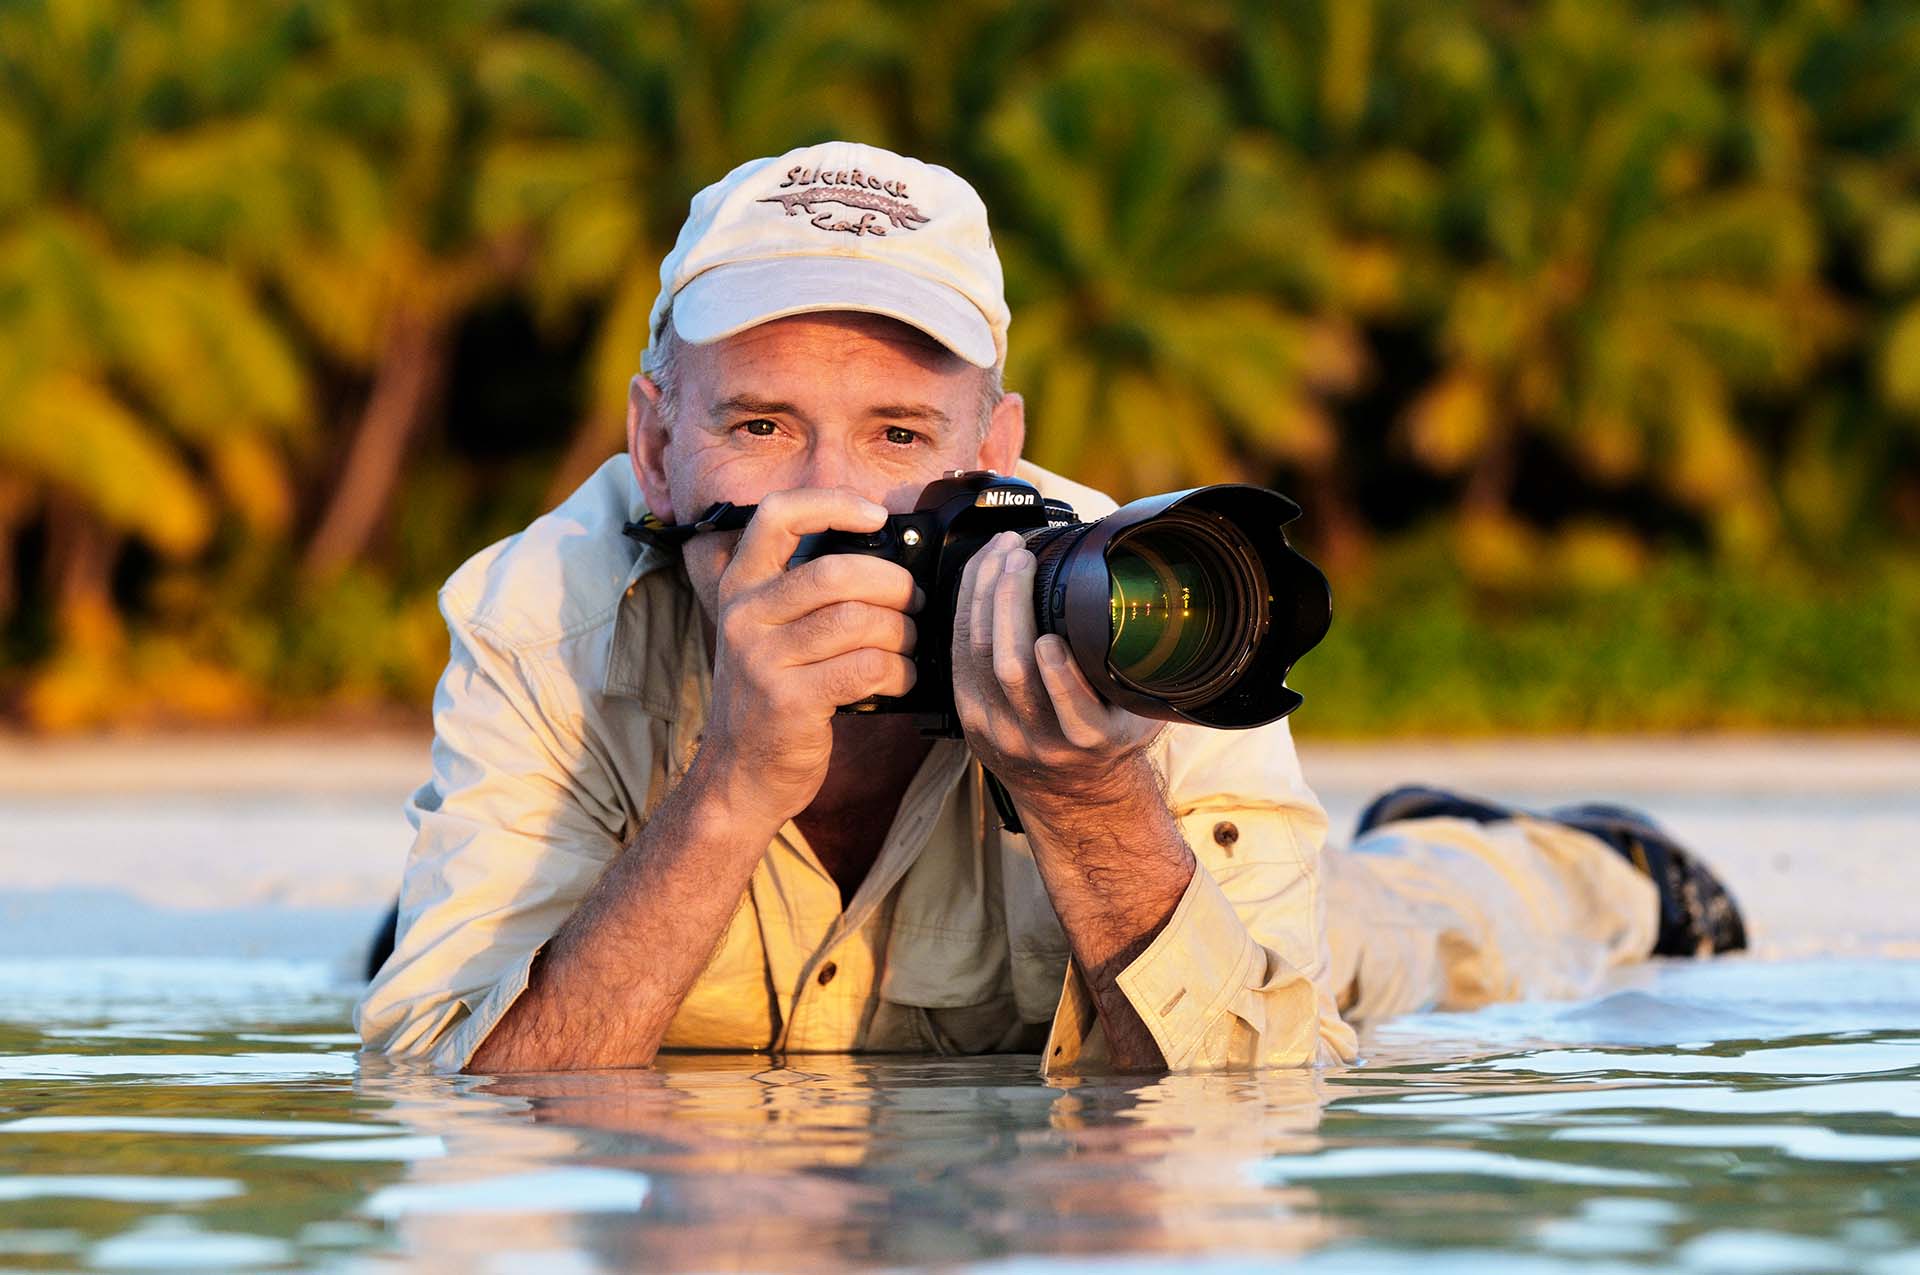 Photographer Martin van Lokven in shallow water with camera.